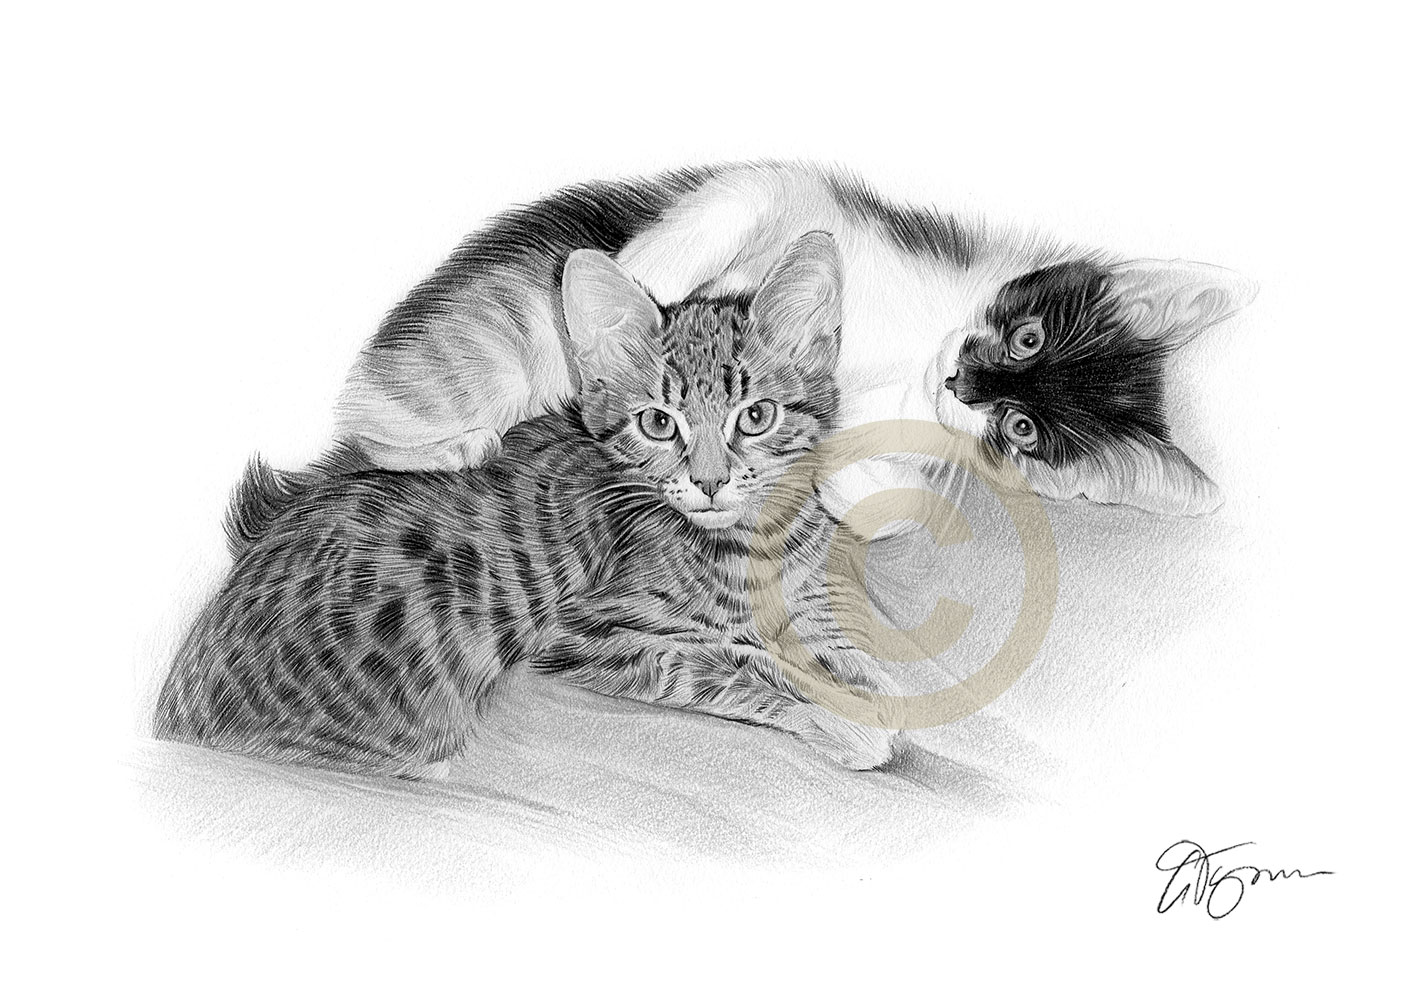 Pet portrait commission of two young cats by artist Gary Tymon